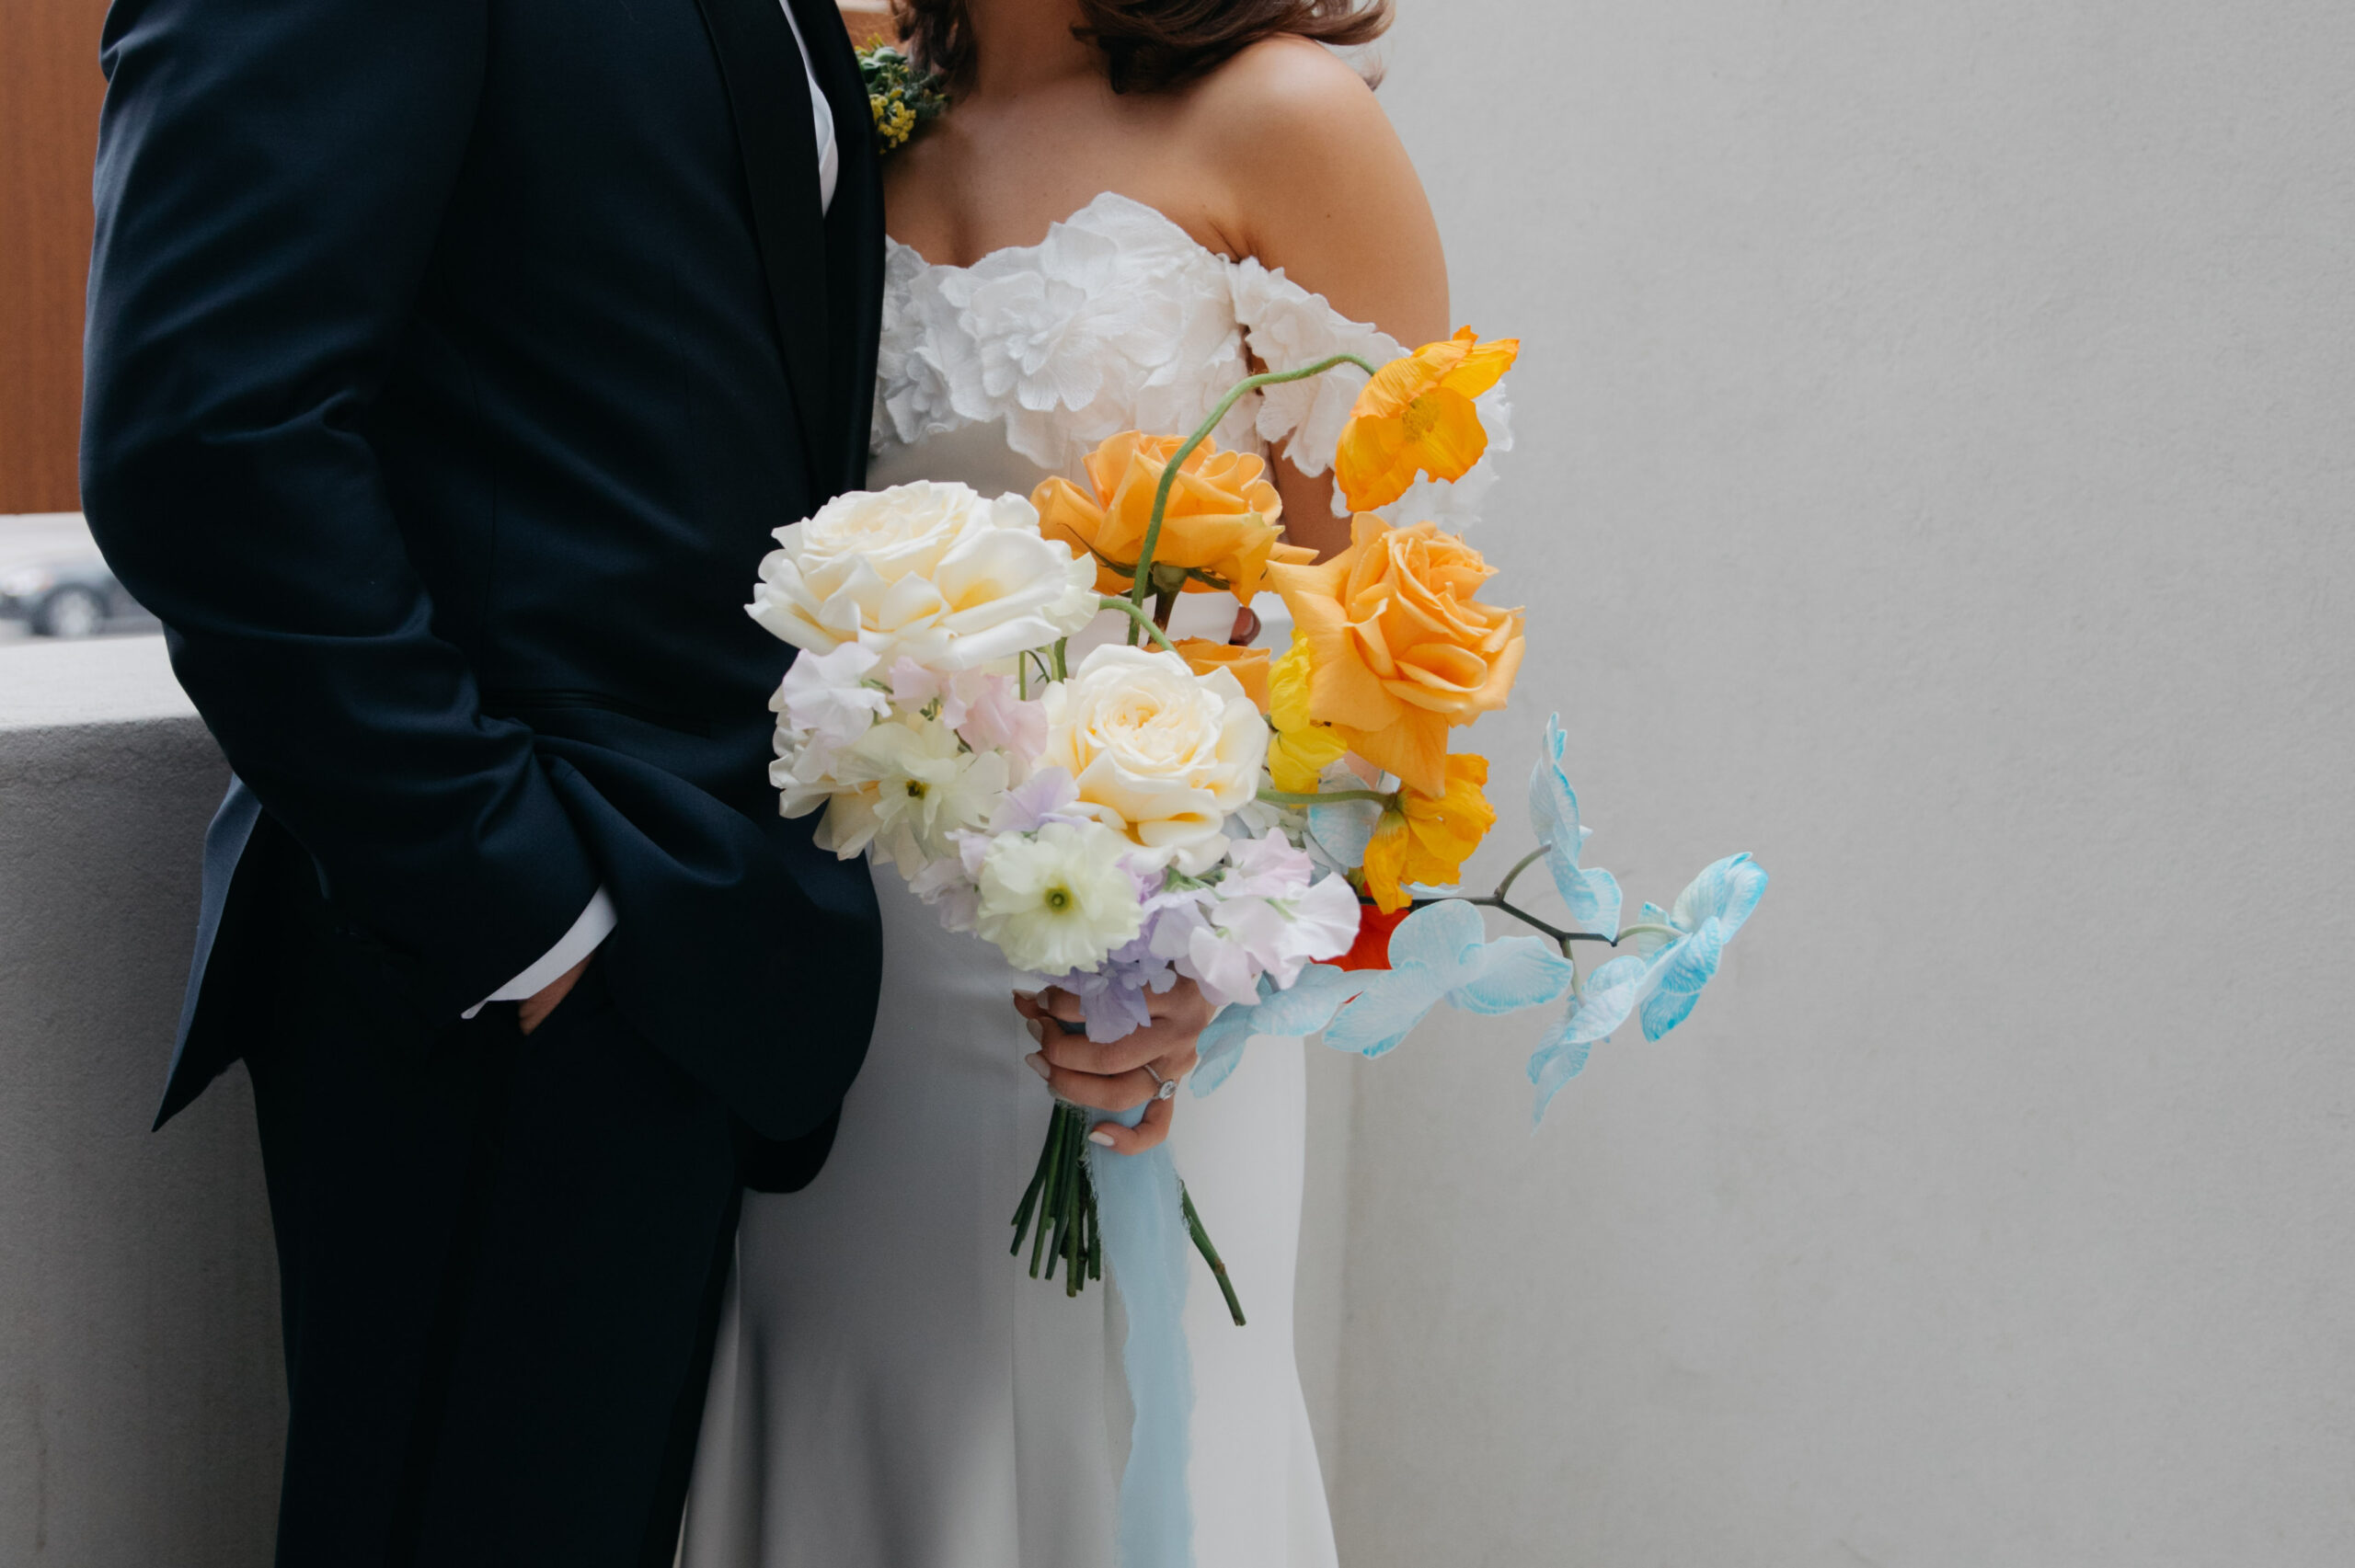 Colorful bouquet being held by bride